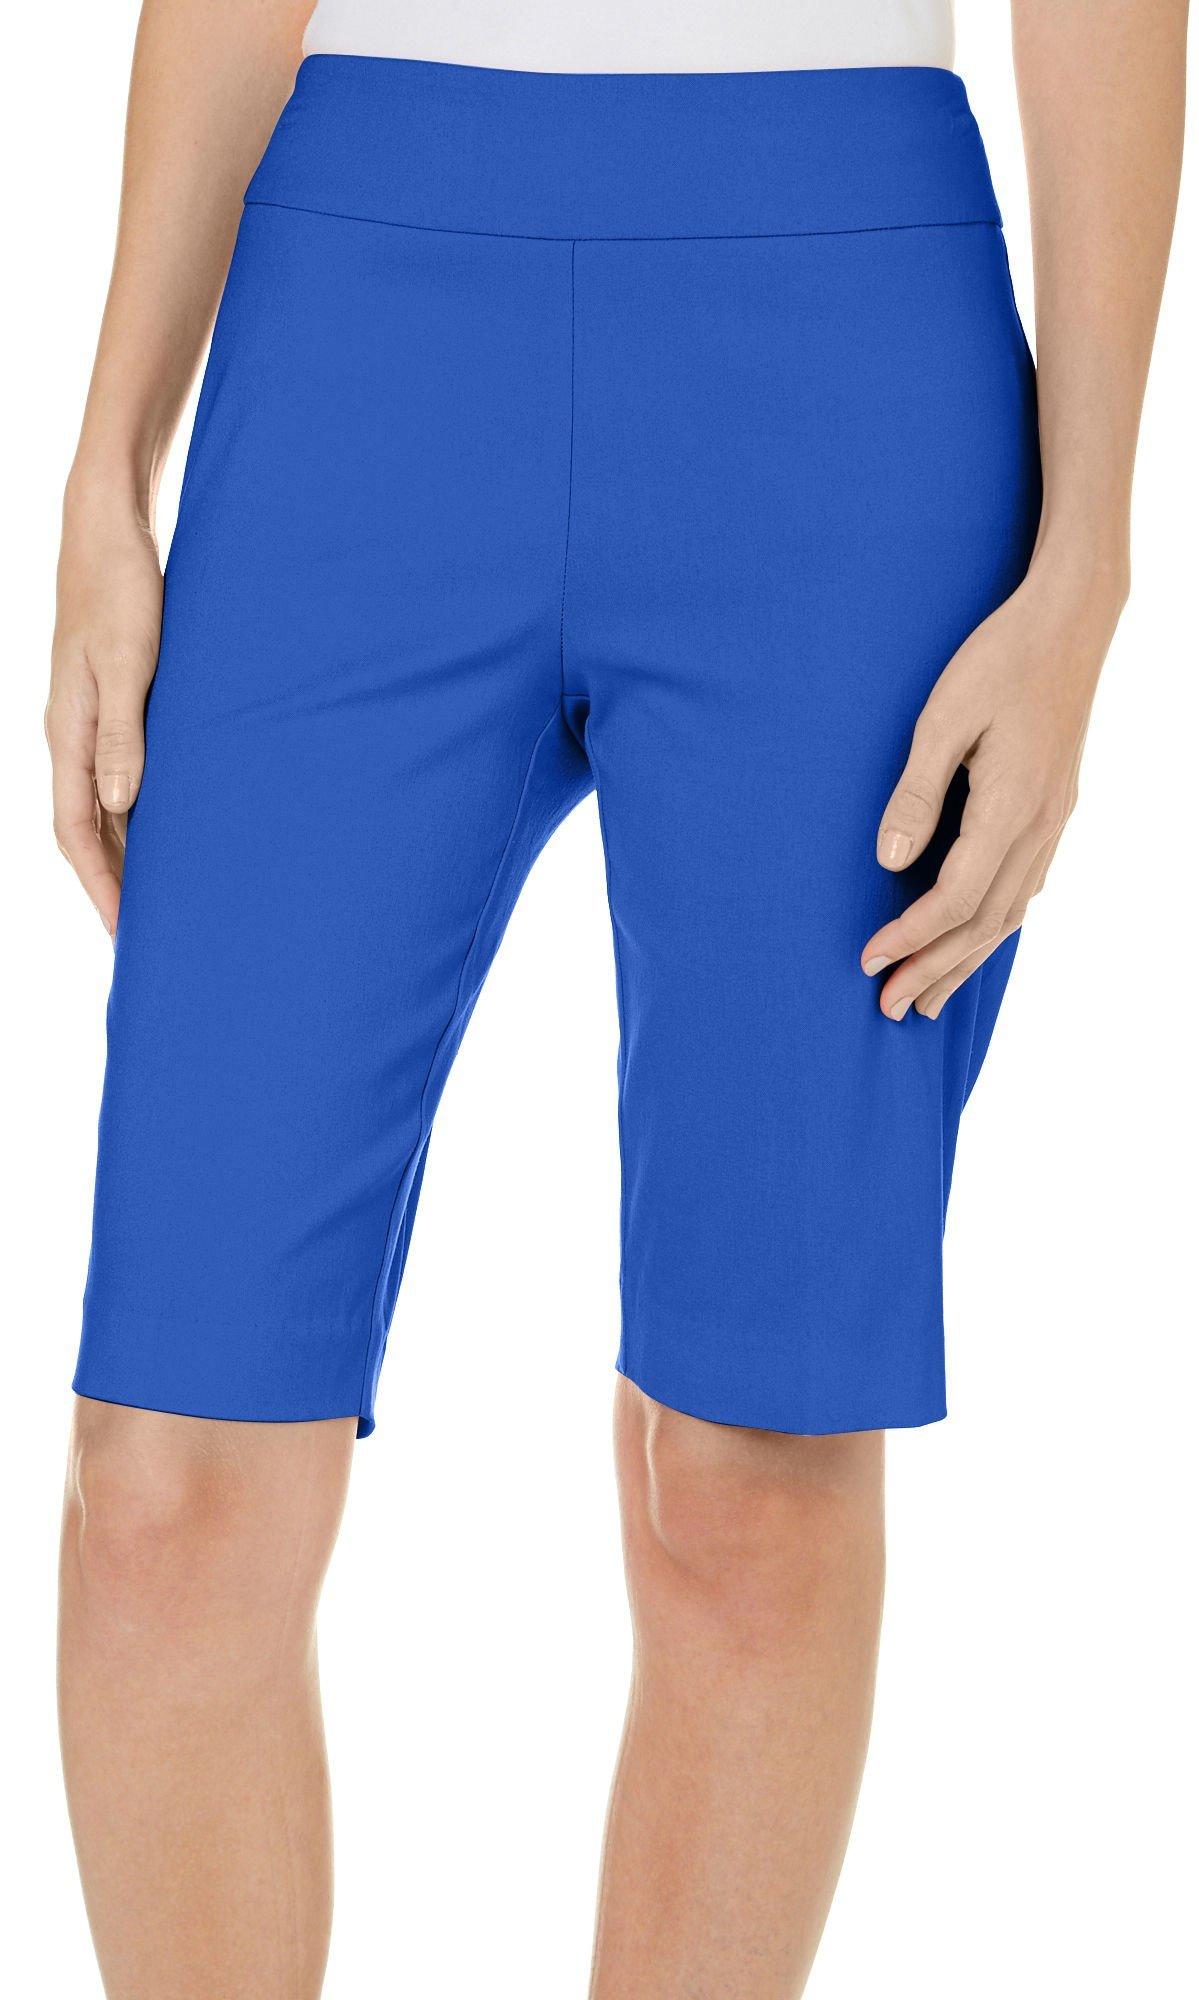 Counterparts Womens Super Stretch Skimmer Shorts